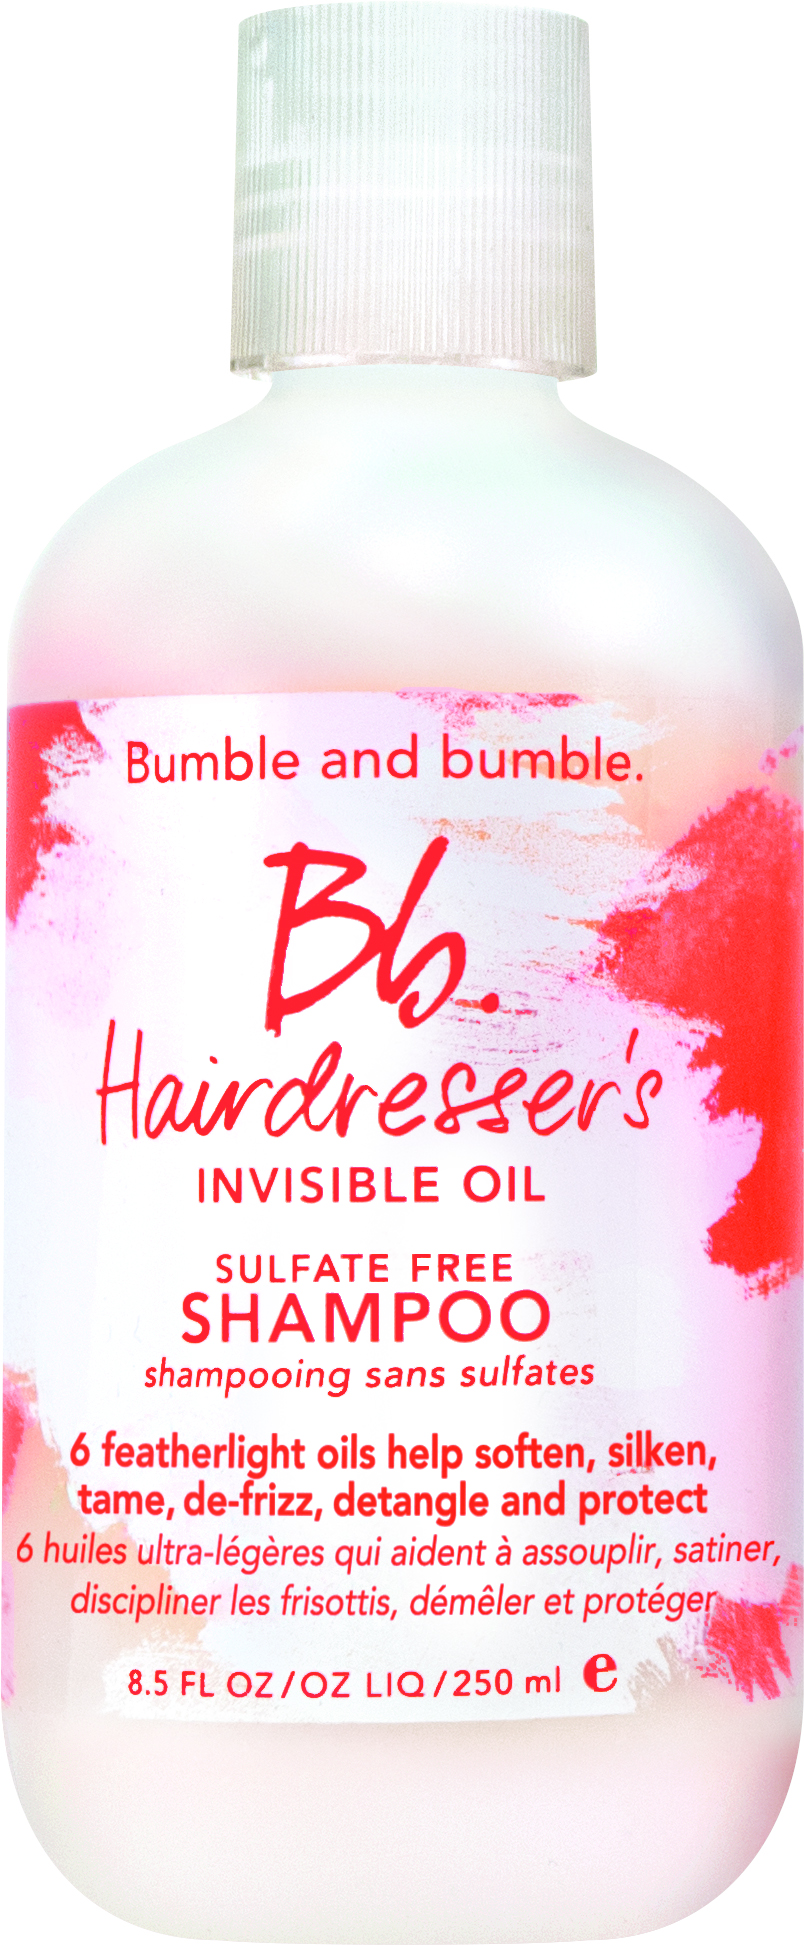 Bumble and bumble Hairdresser´s Invisible Oil Shampoo 250ml